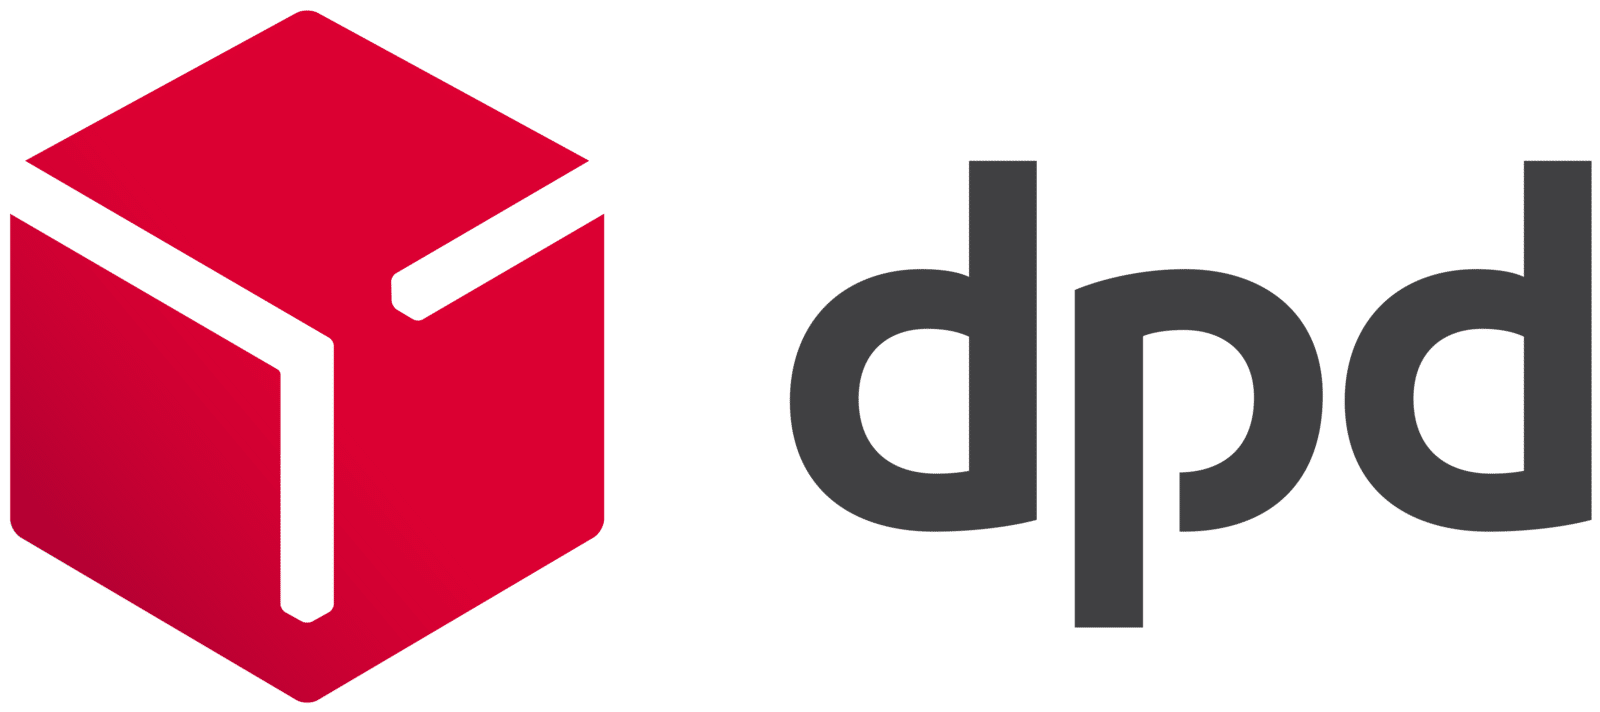 Dpd_Logo(Red)2015